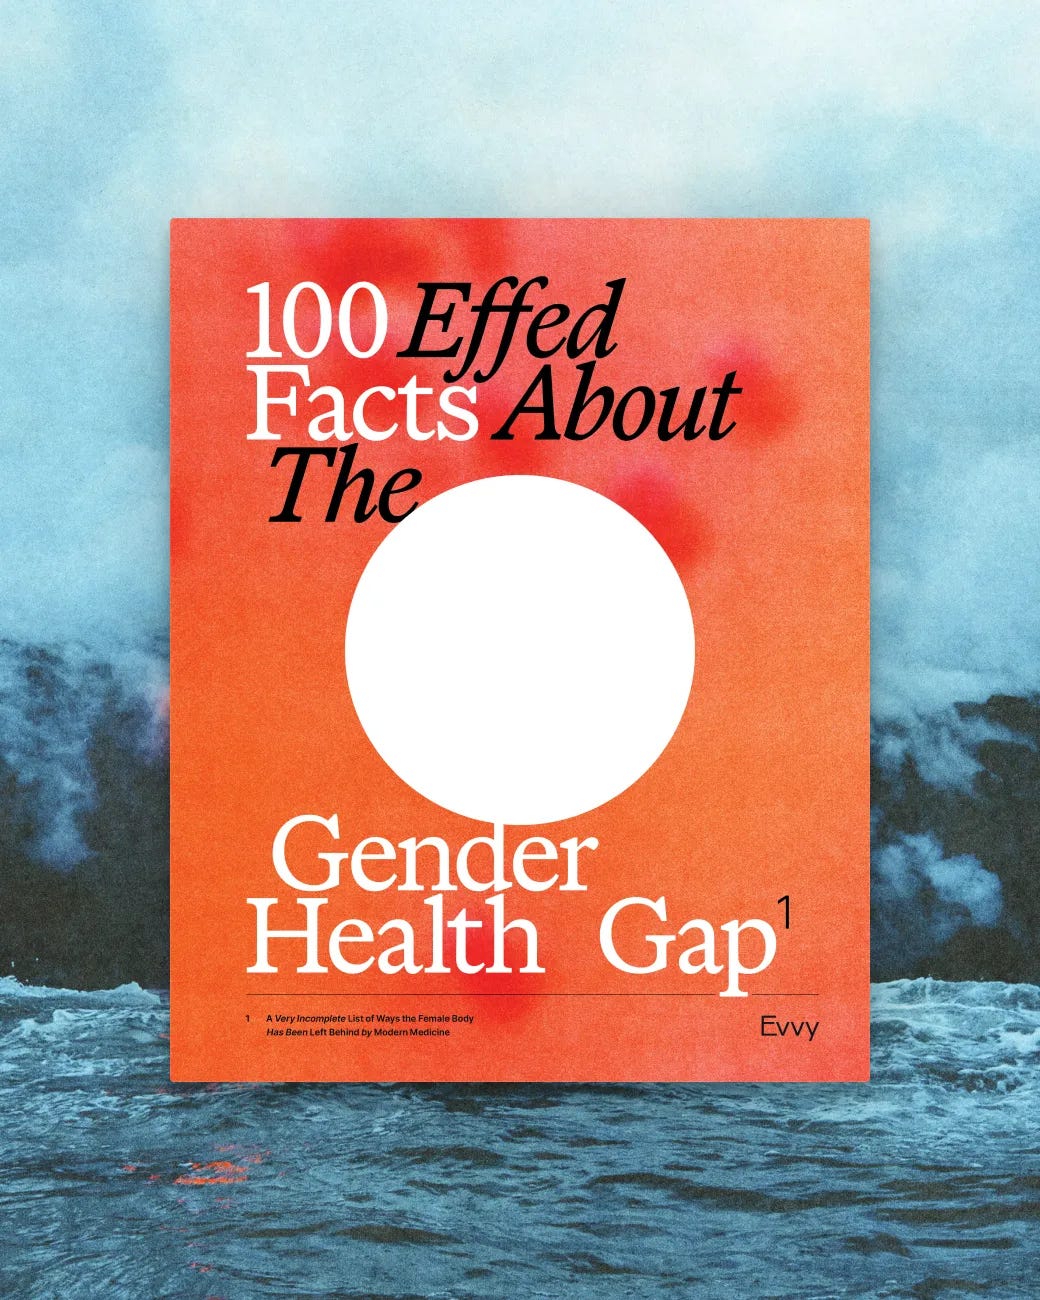 Image of the book 100 Effed up facts about the gender health gap